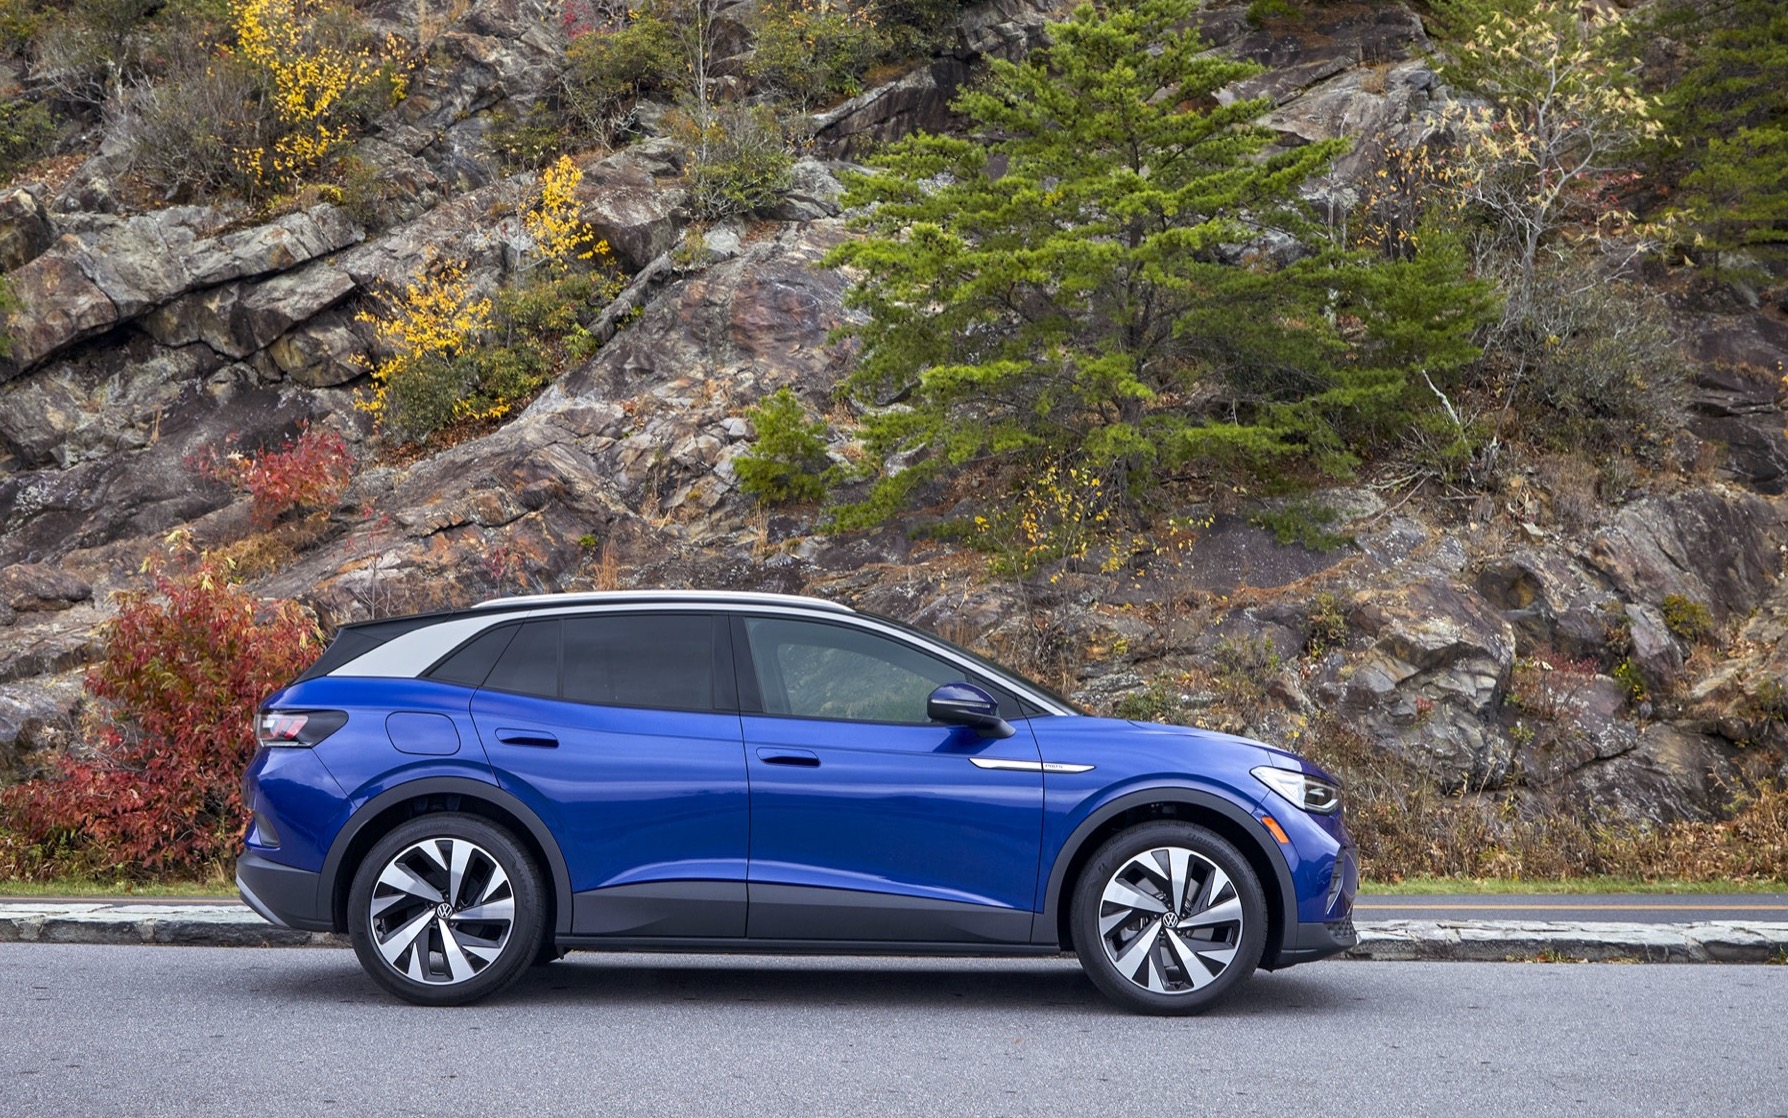 2022-volkswagen-id-4-range-boosted-now-up-to-280-miles-news-evearly